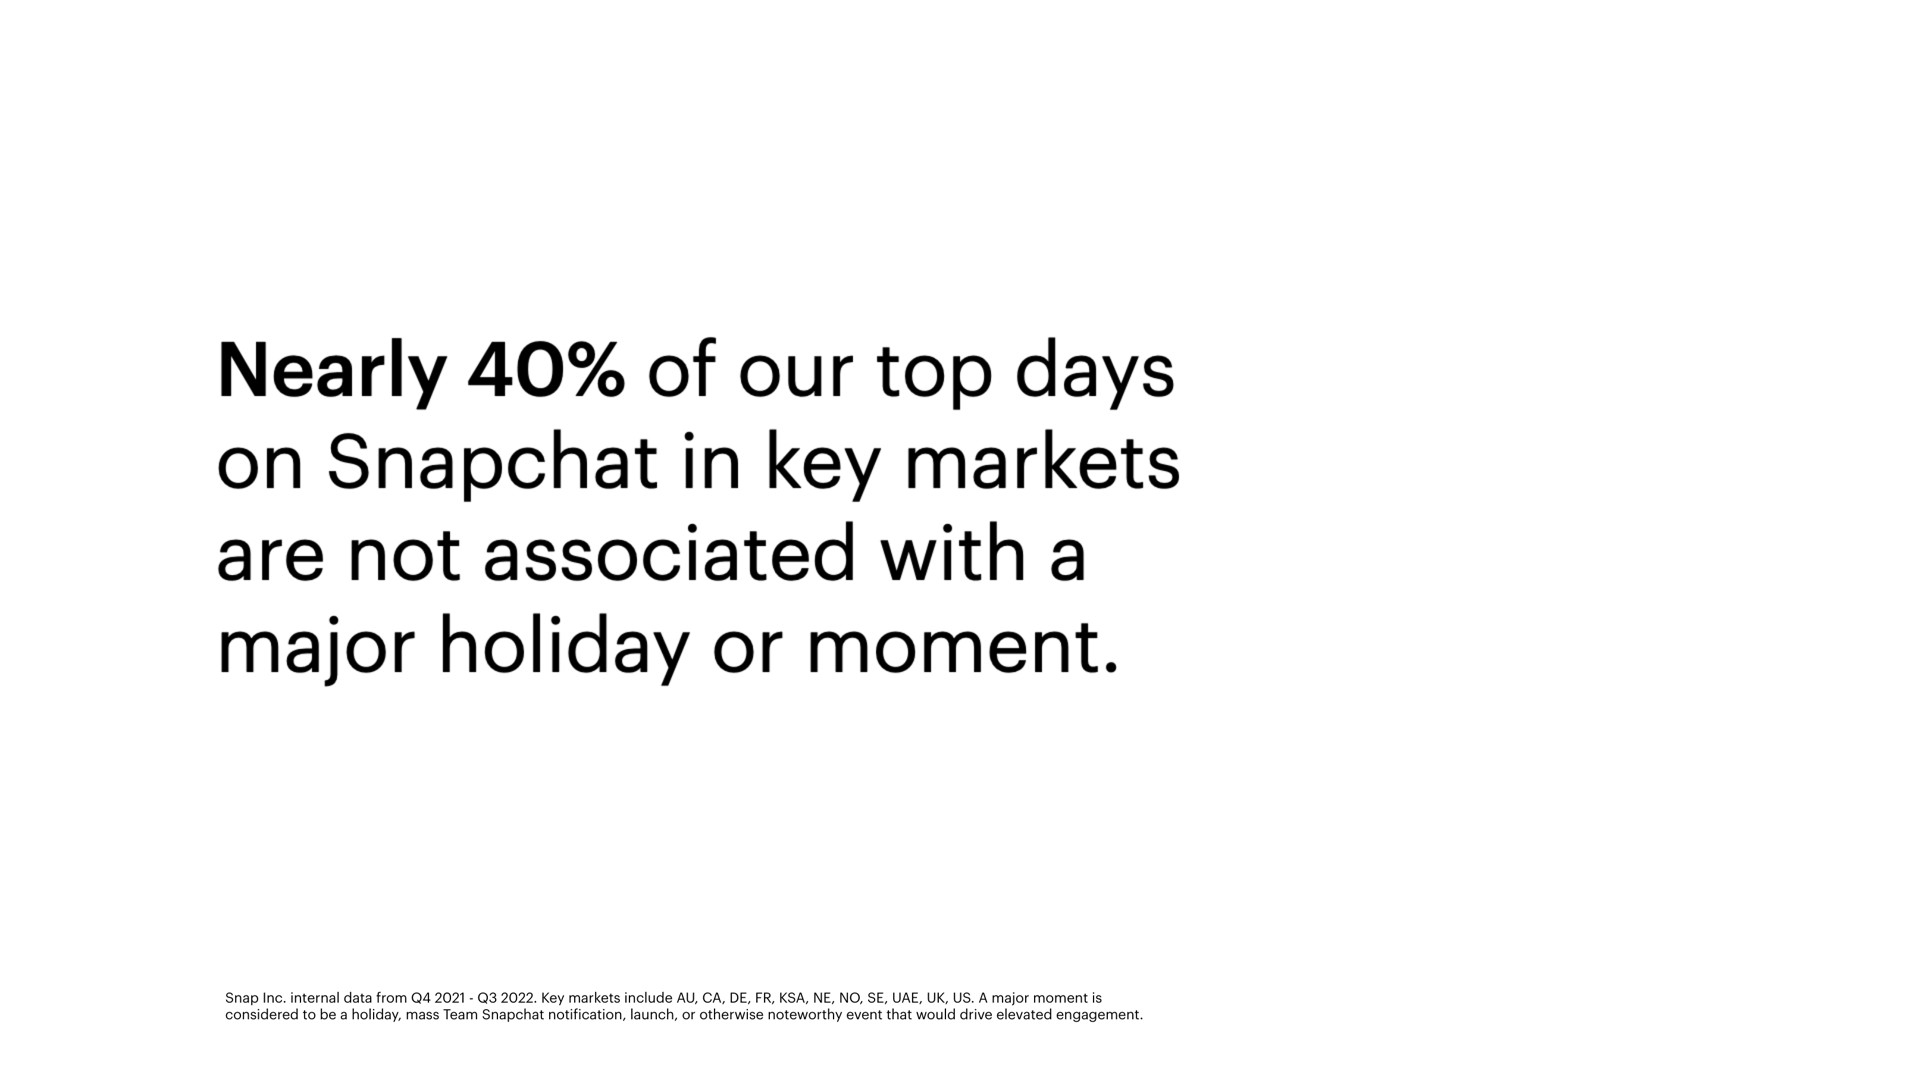 nearly of our top days on in key markets are not associated with a major holiday or moment | Snap Inc